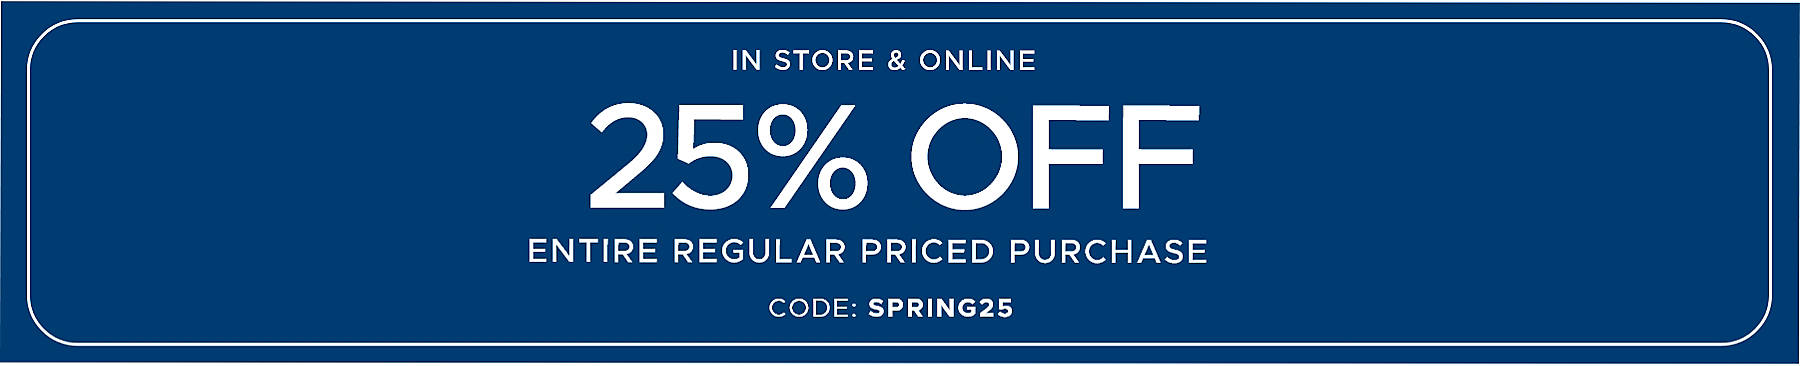 Online Only 25% off Entire Regular Priced Purchase code: SPRING25